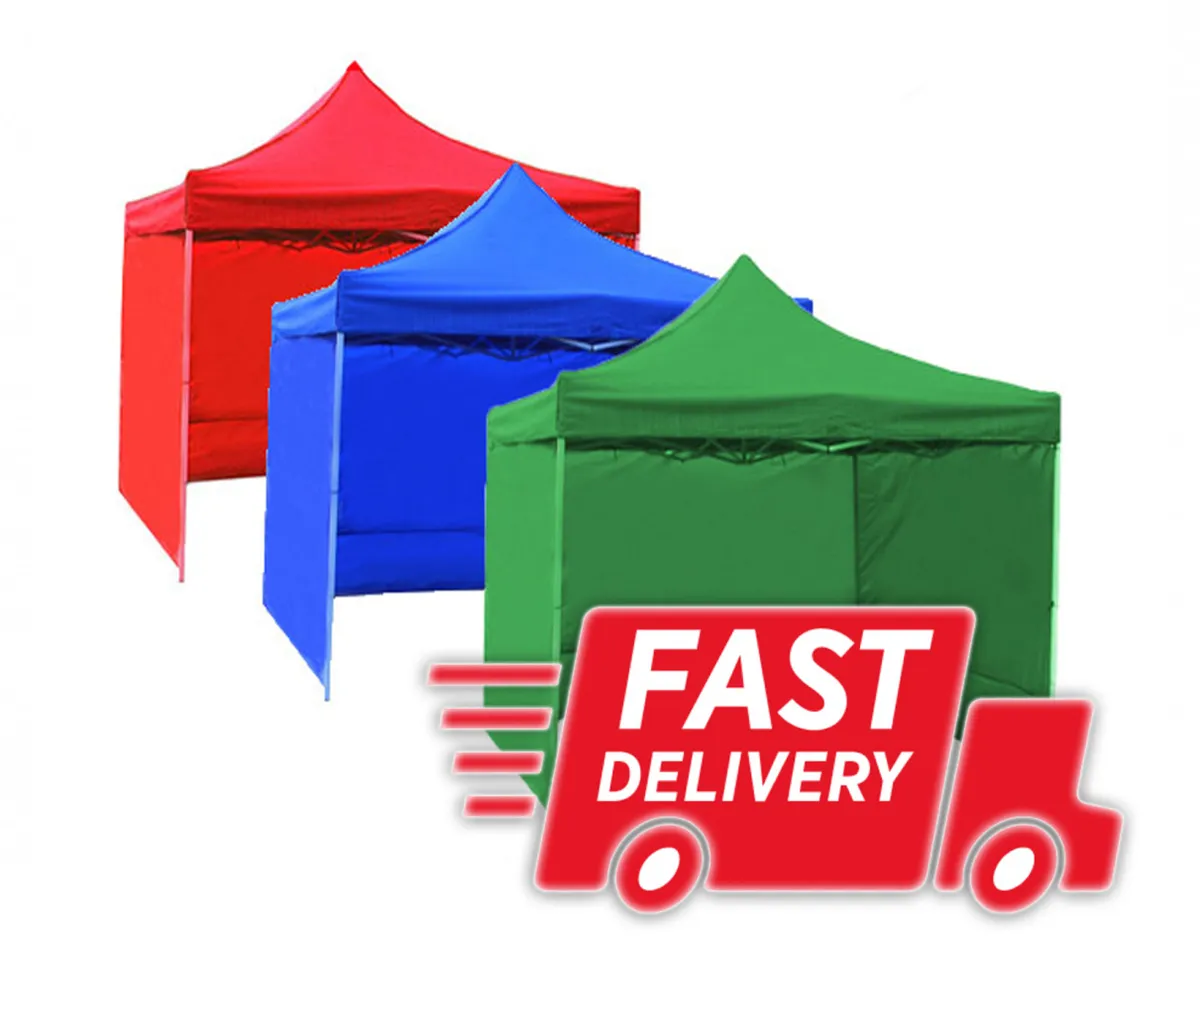 NEW 3x3mPop Up GAZEBO **FAST DELIVERY** - Image 1